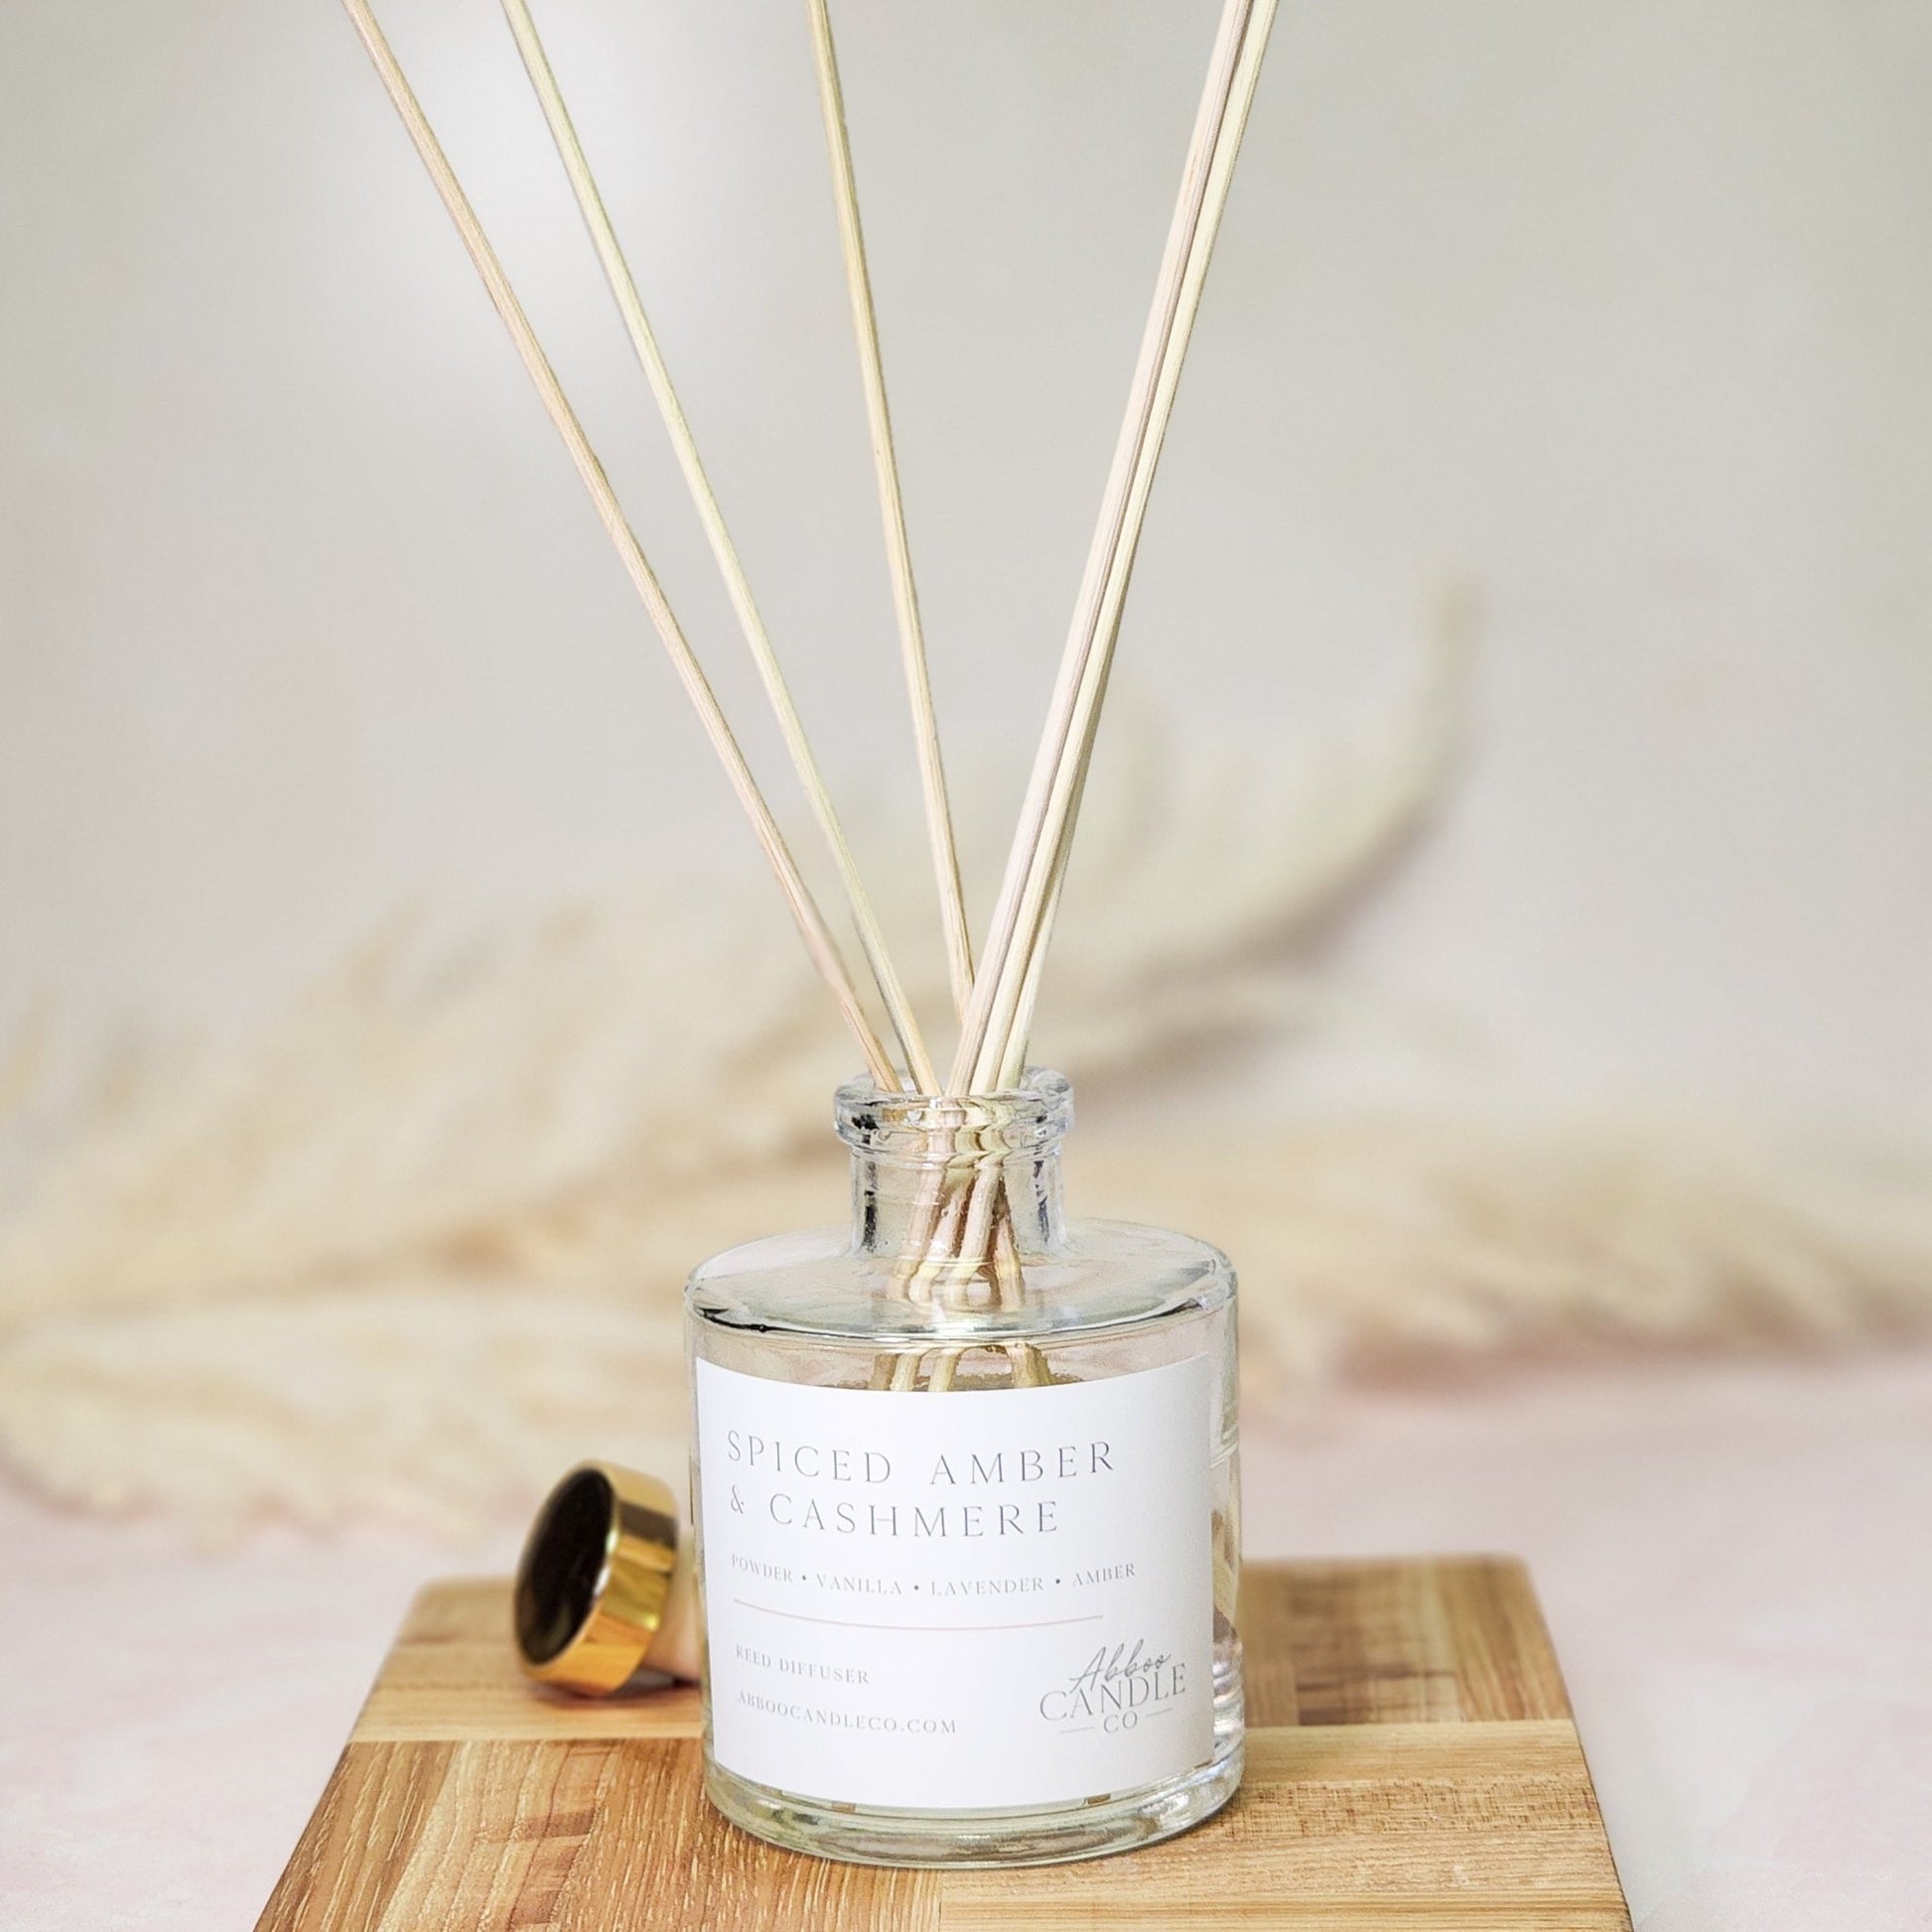 Spiced Amber and Cashmere Reed Diffuser - Abboo Candle Co